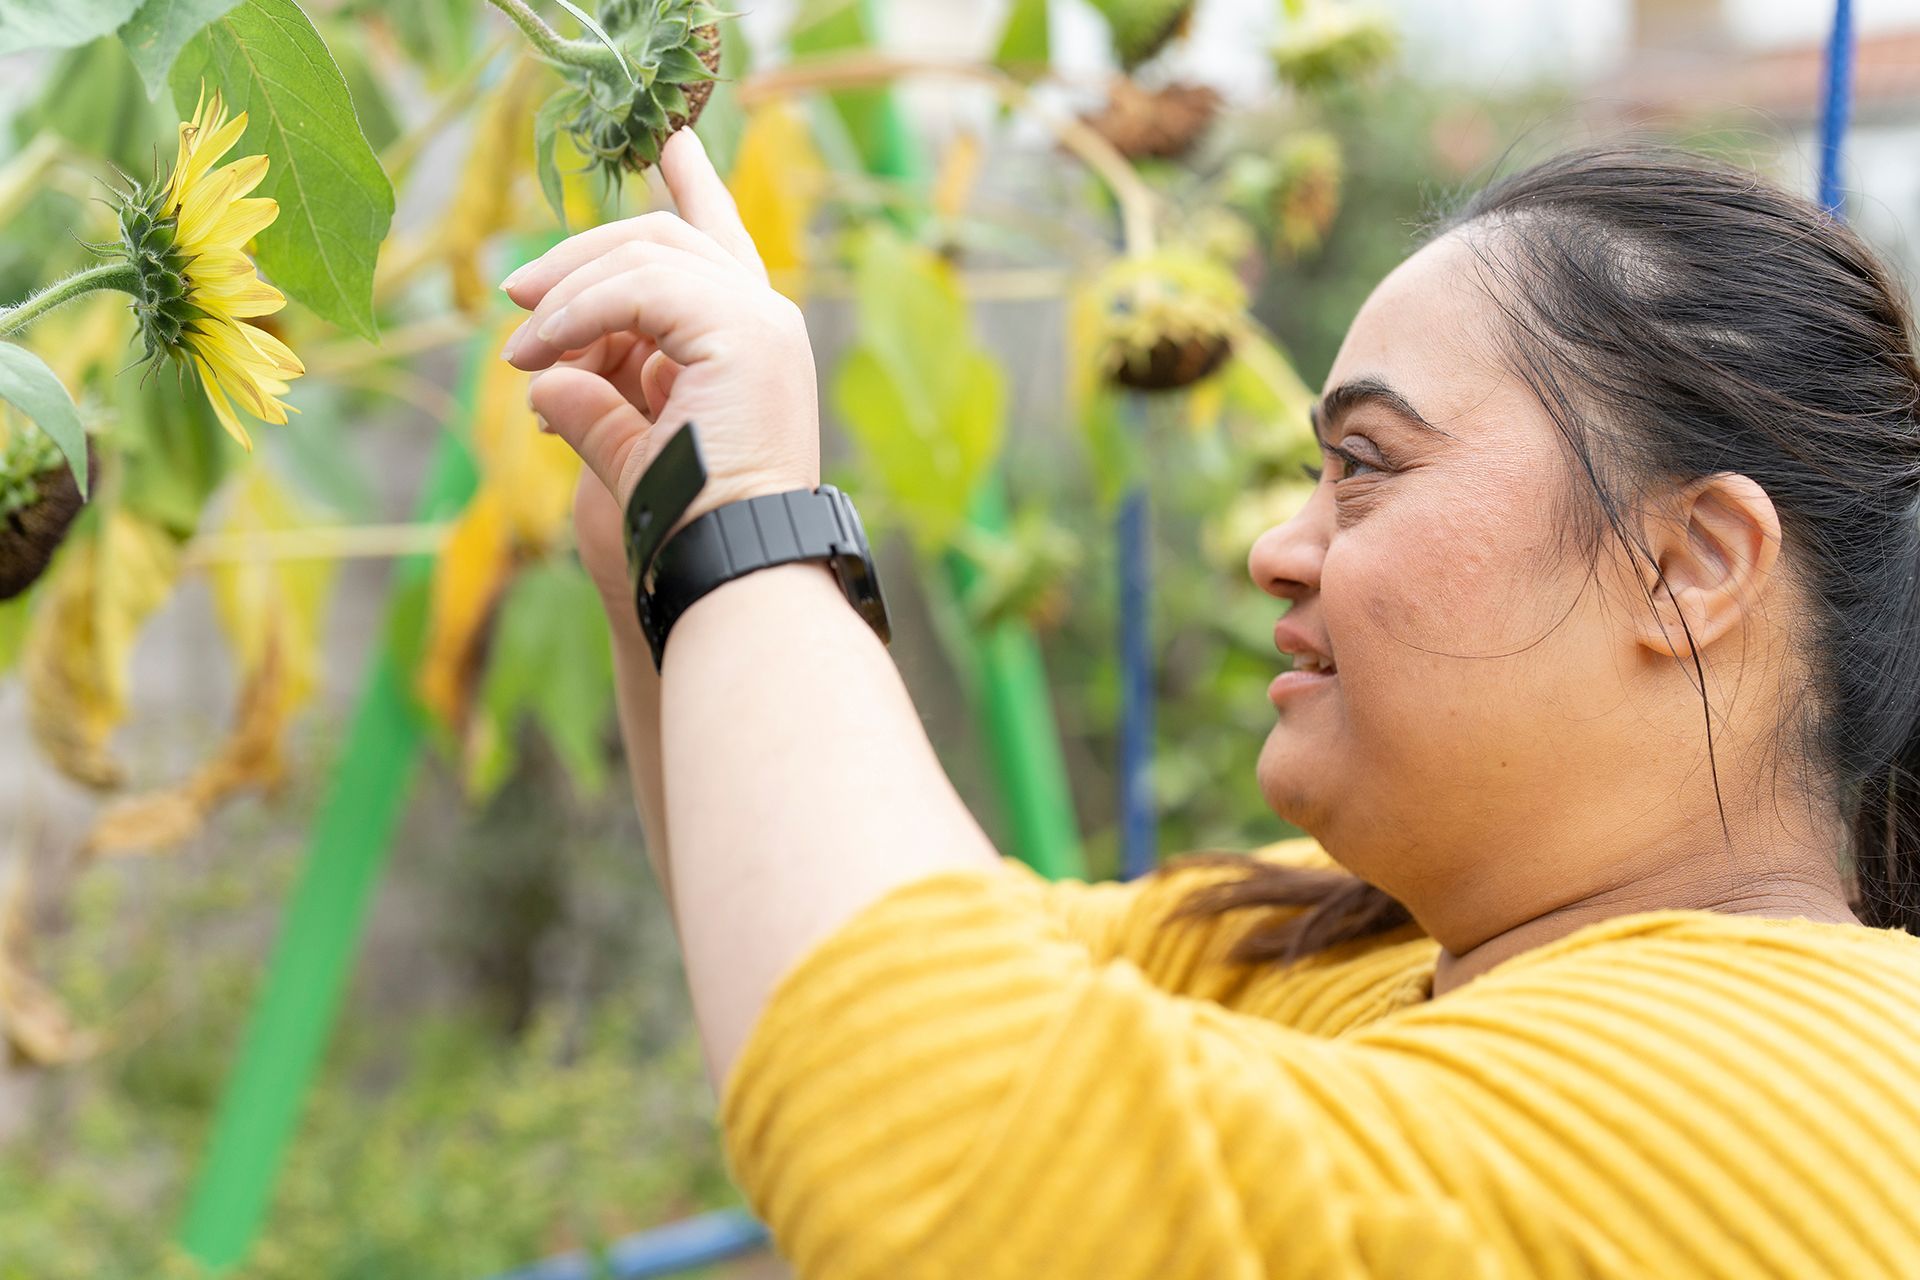 a woman in a yellow shirt is picking a sunflower from a plant